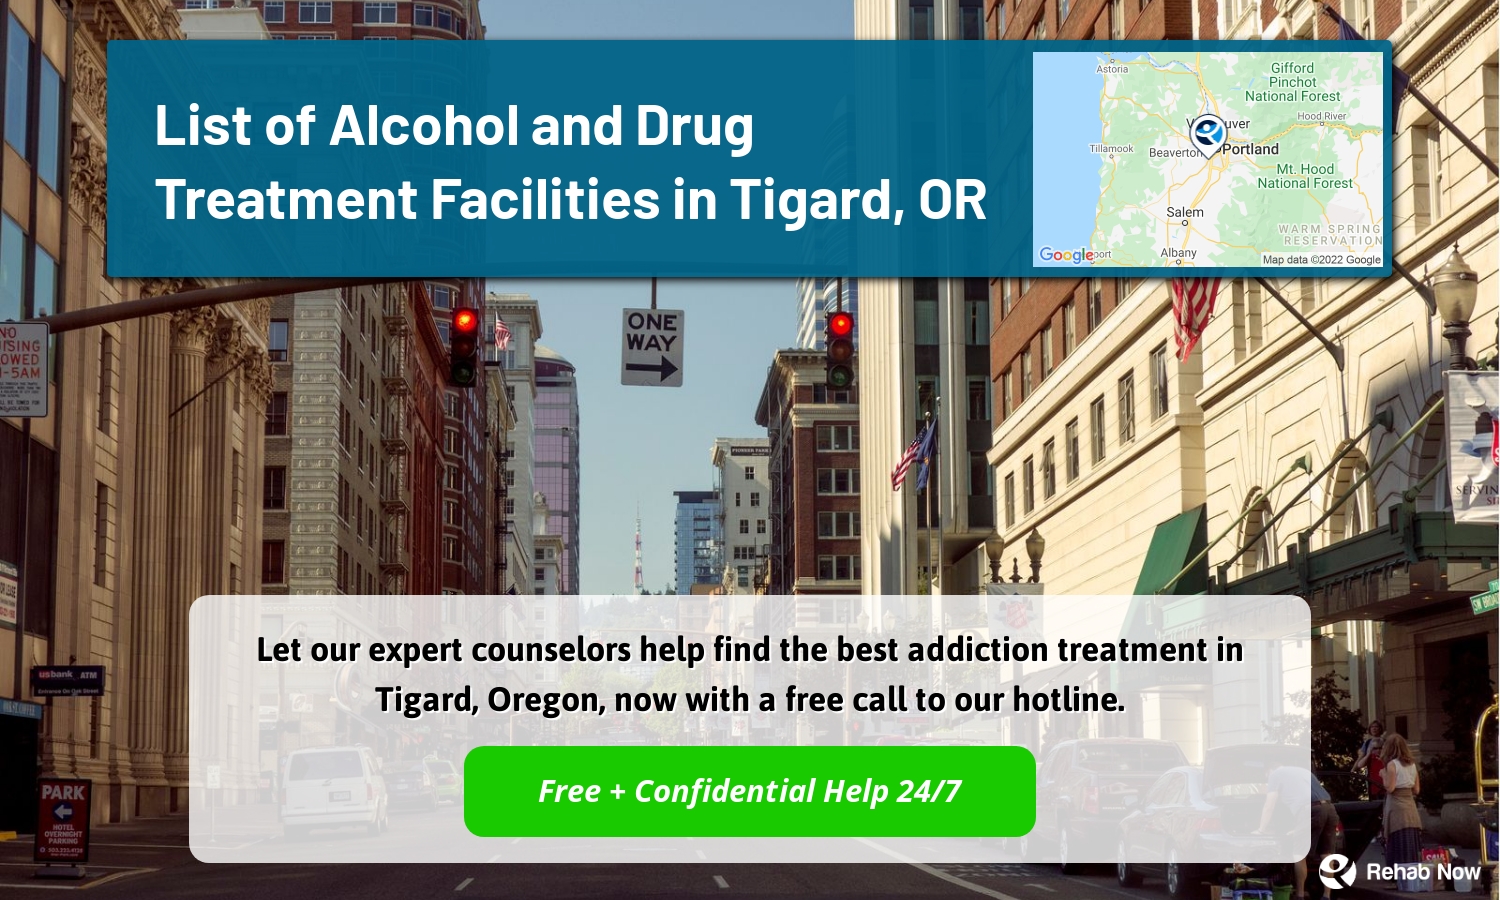 Let our expert counselors help find the best addiction treatment in Tigard, Oregon, now with a free call to our hotline.